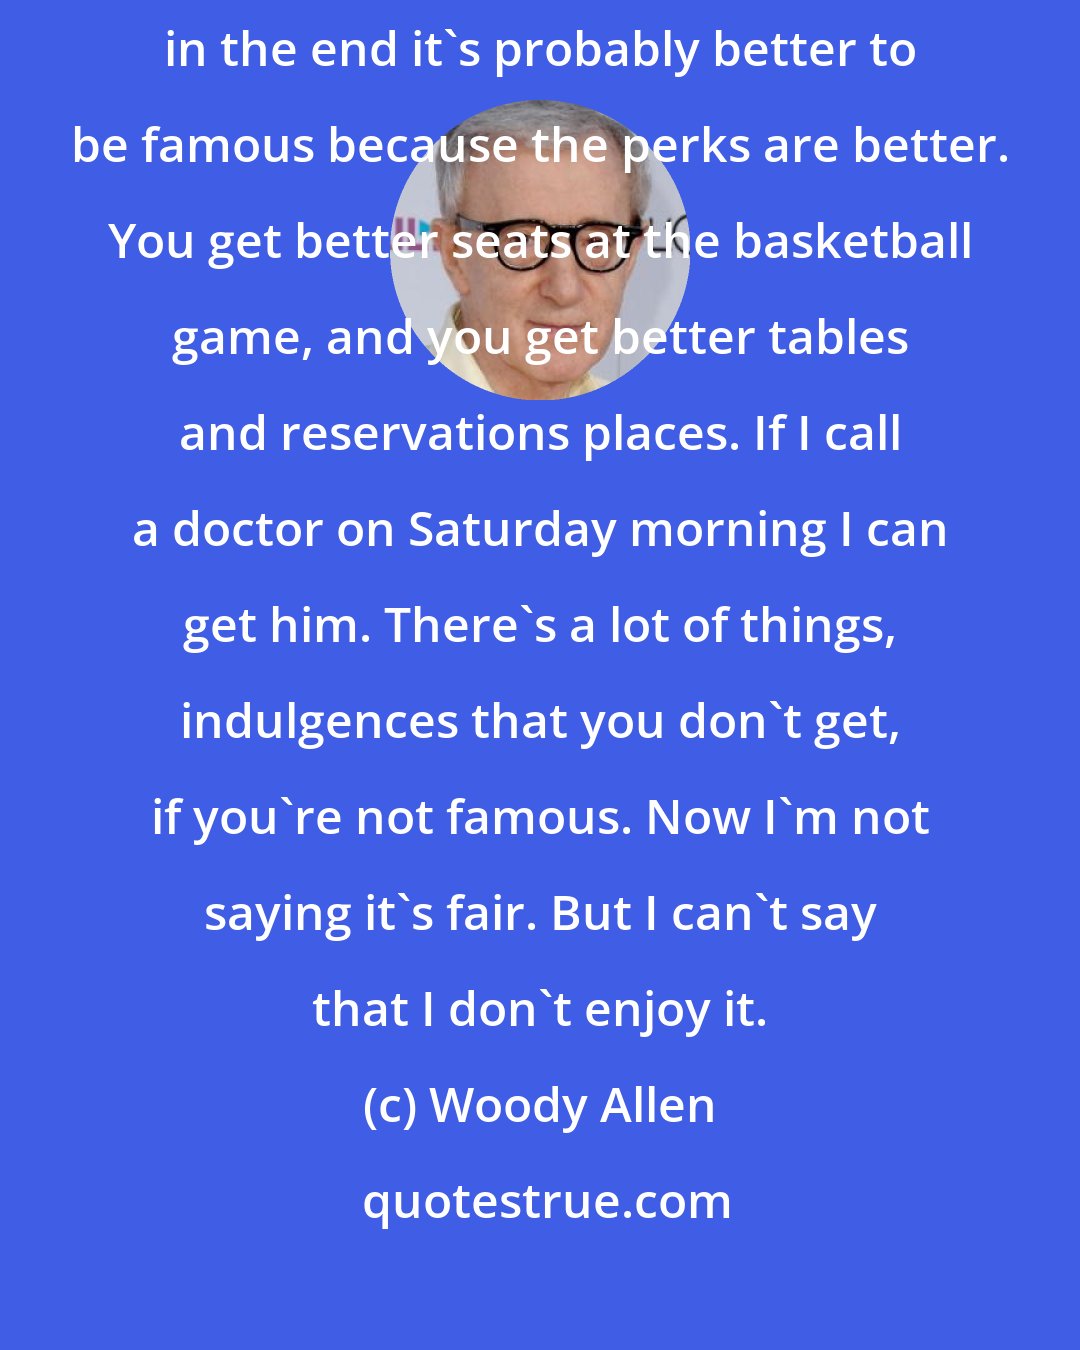 Woody Allen: Life is tough and it's tough whether you're famous or not famous. And in the end it's probably better to be famous because the perks are better. You get better seats at the basketball game, and you get better tables and reservations places. If I call a doctor on Saturday morning I can get him. There's a lot of things, indulgences that you don't get, if you're not famous. Now I'm not saying it's fair. But I can't say that I don't enjoy it.